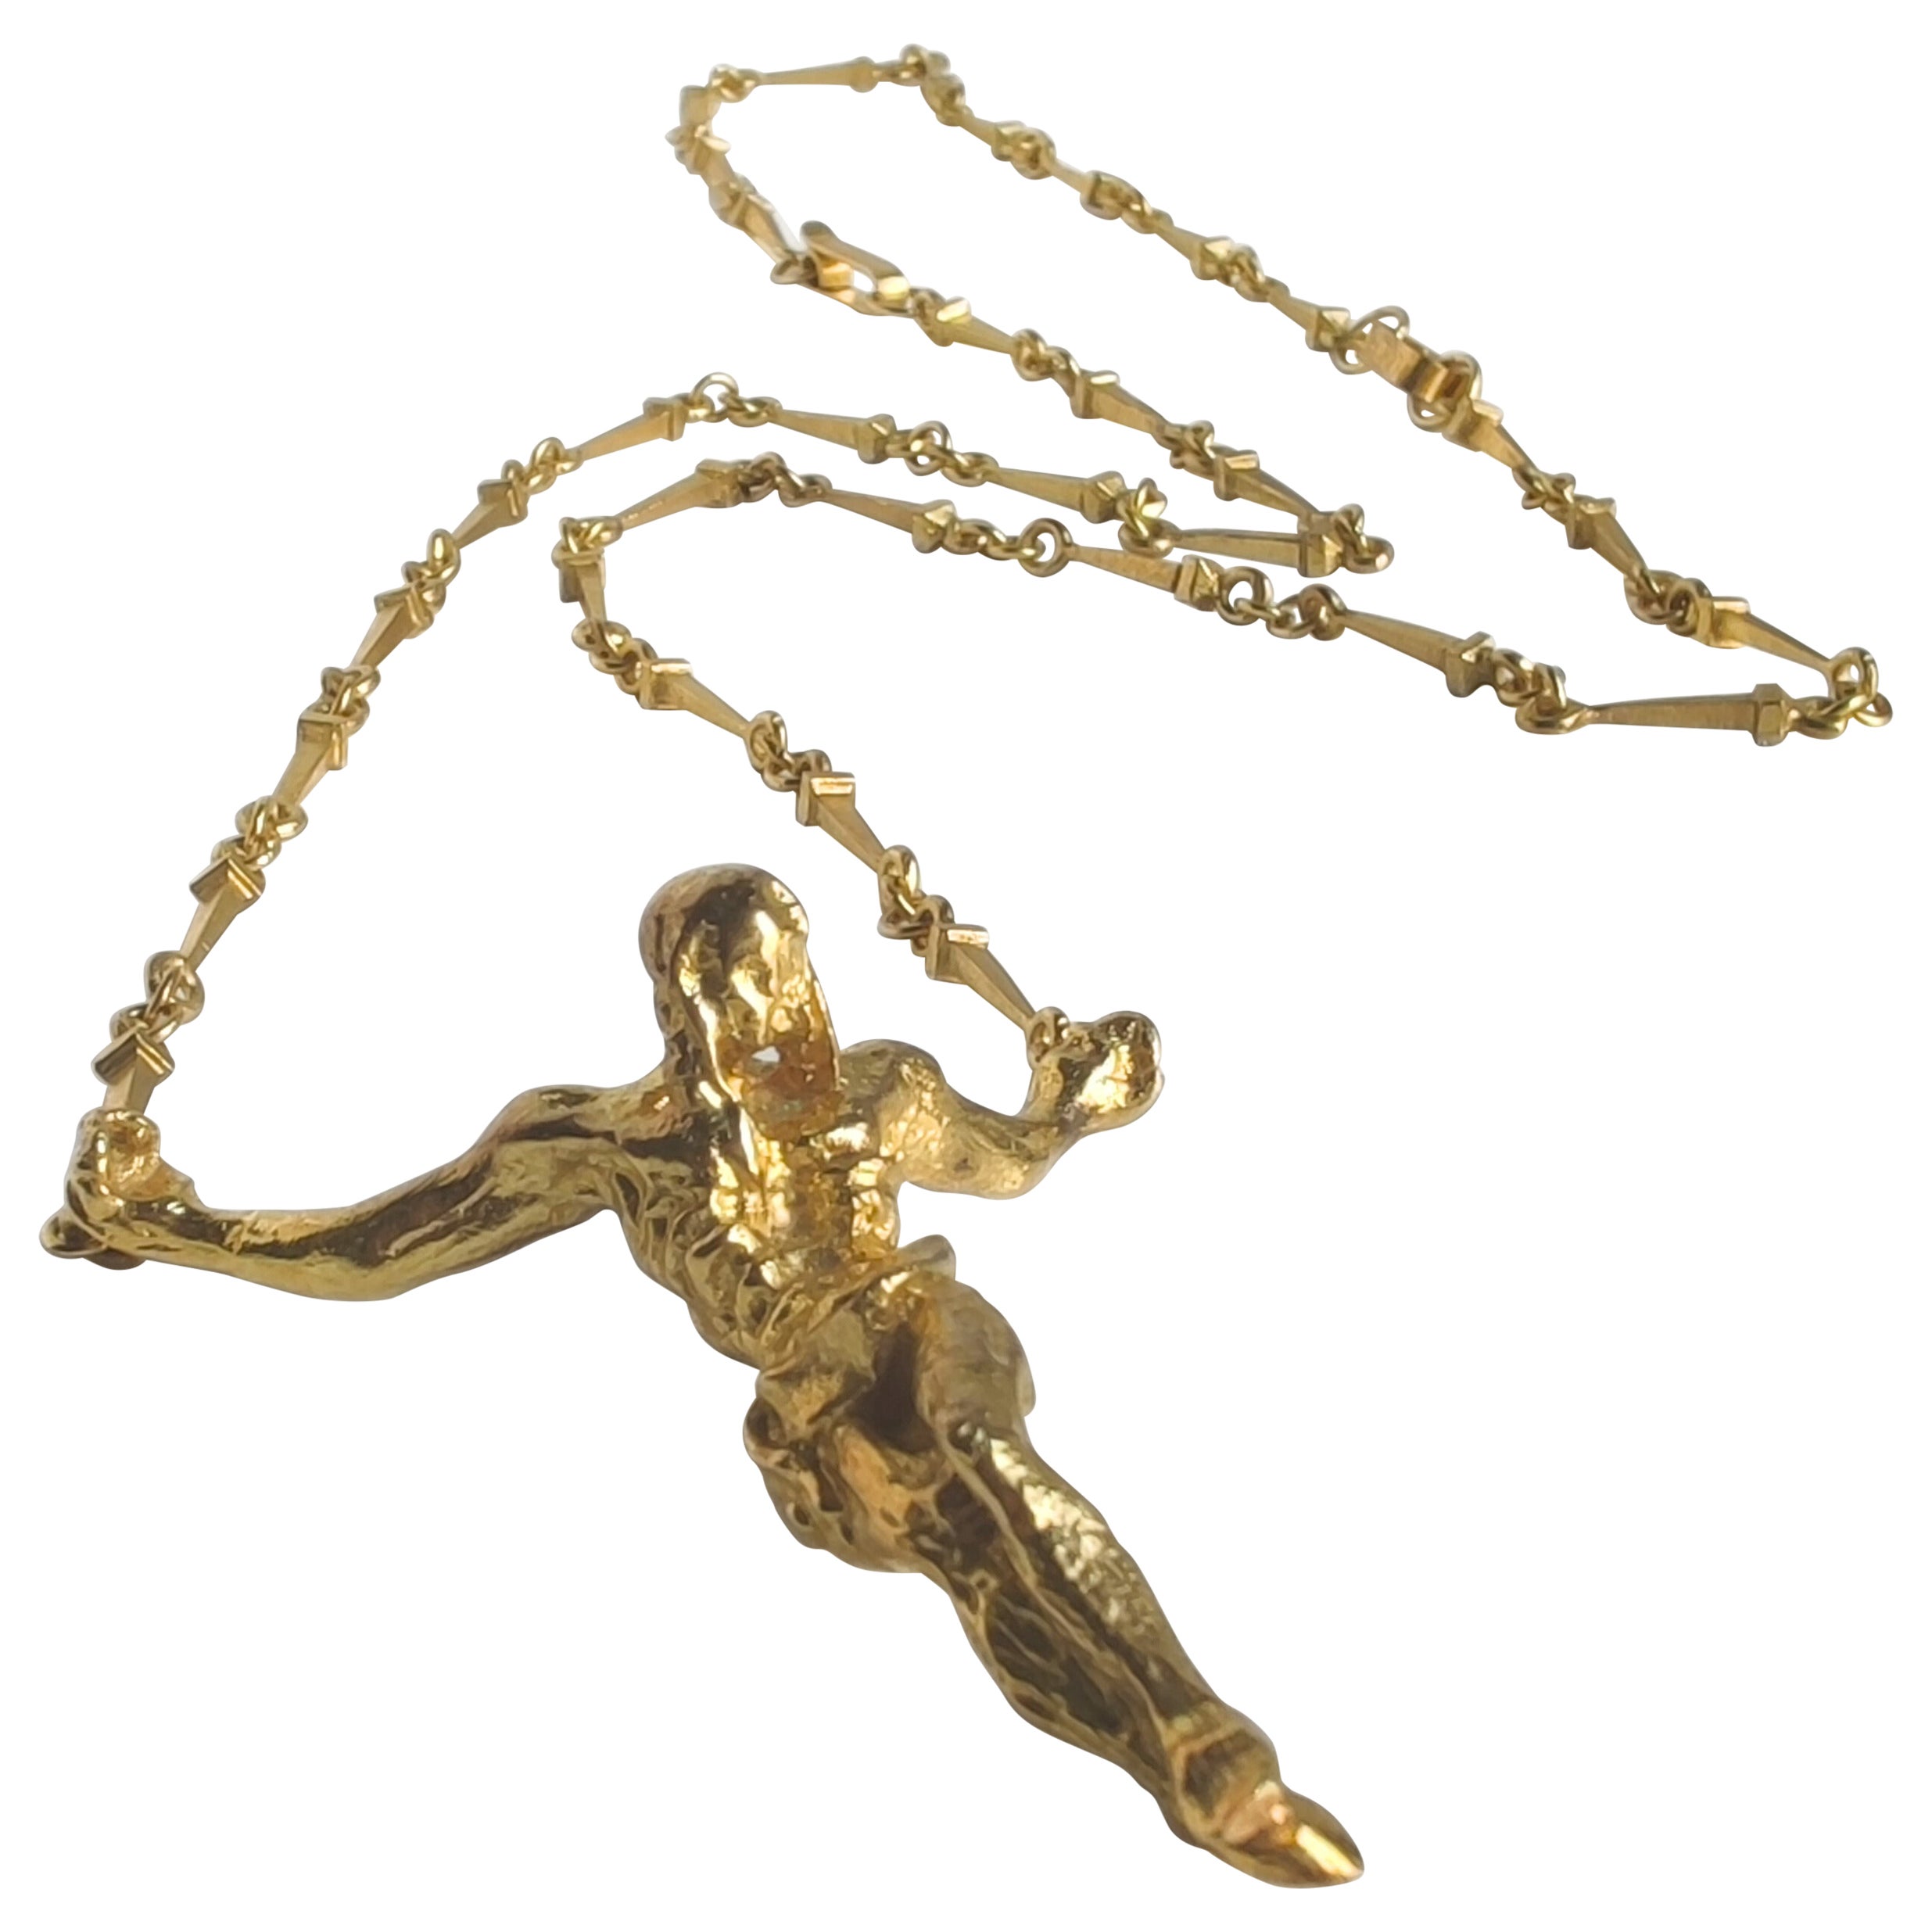 Exclusive Dalí 18K solid gold 'St. John Cross' Necklace #A-821 - With Provenance For Sale